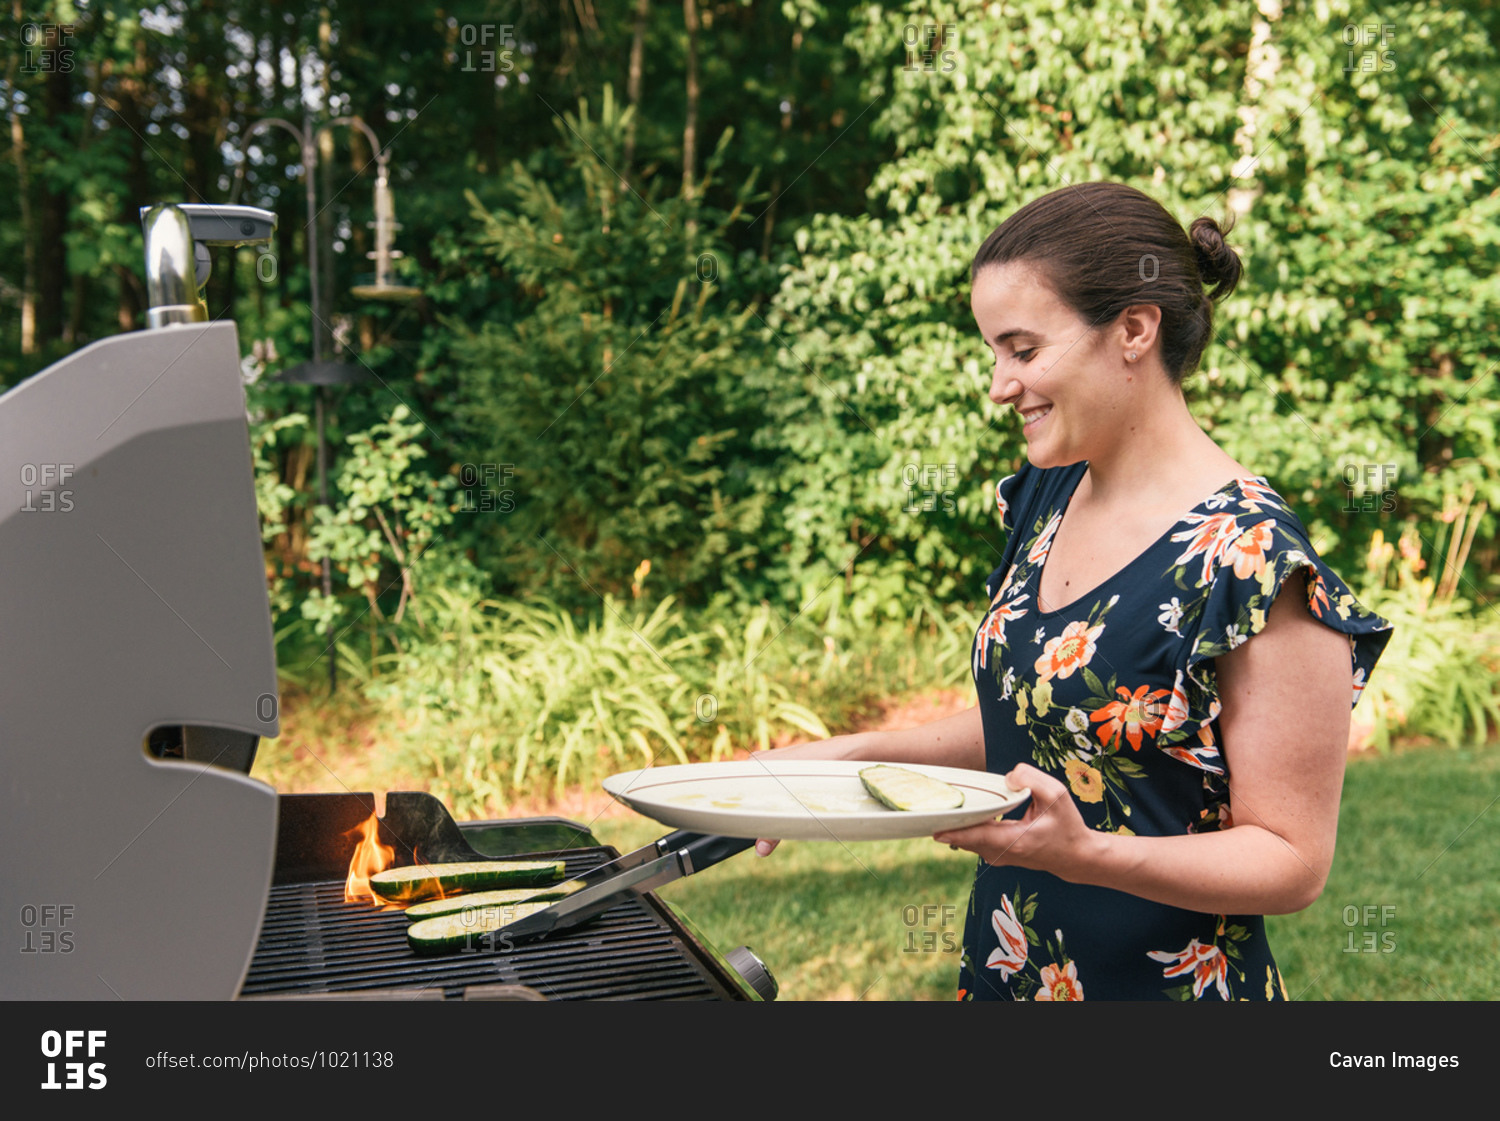 Woman grilling squash with flames on barbecue at home grill